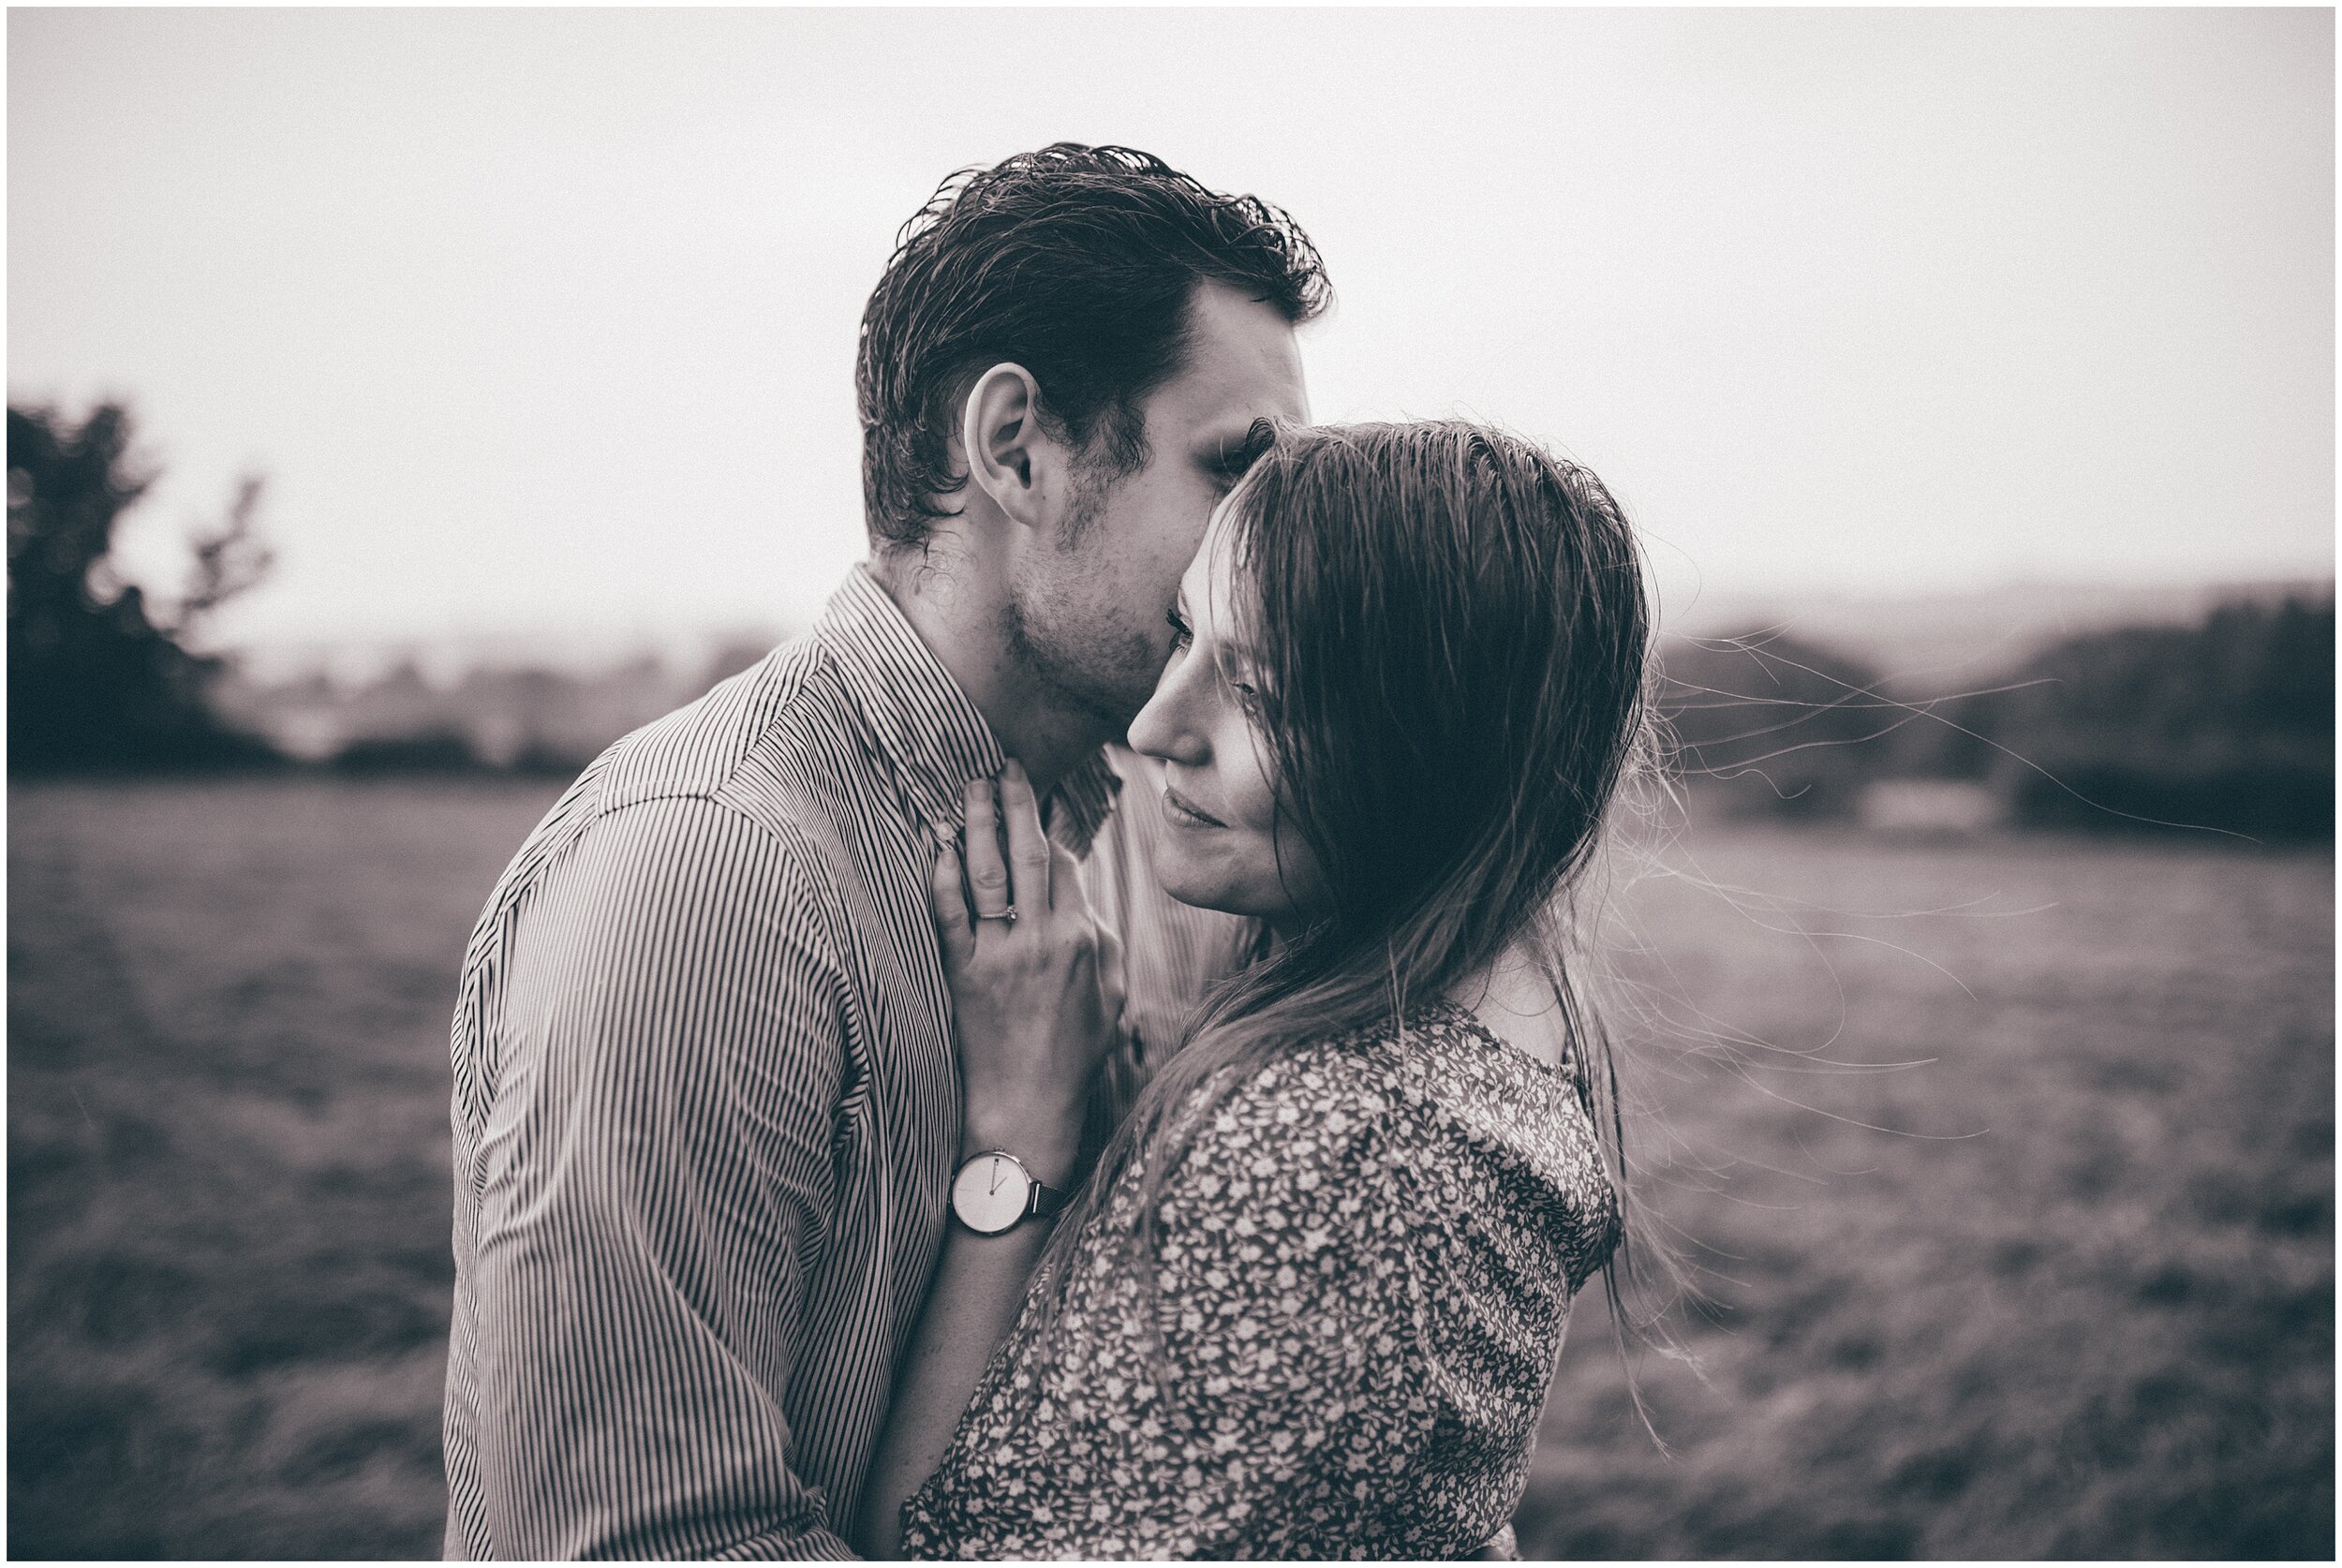 Romantic black and white photograph from thunderstorm photoshoot with young couple.